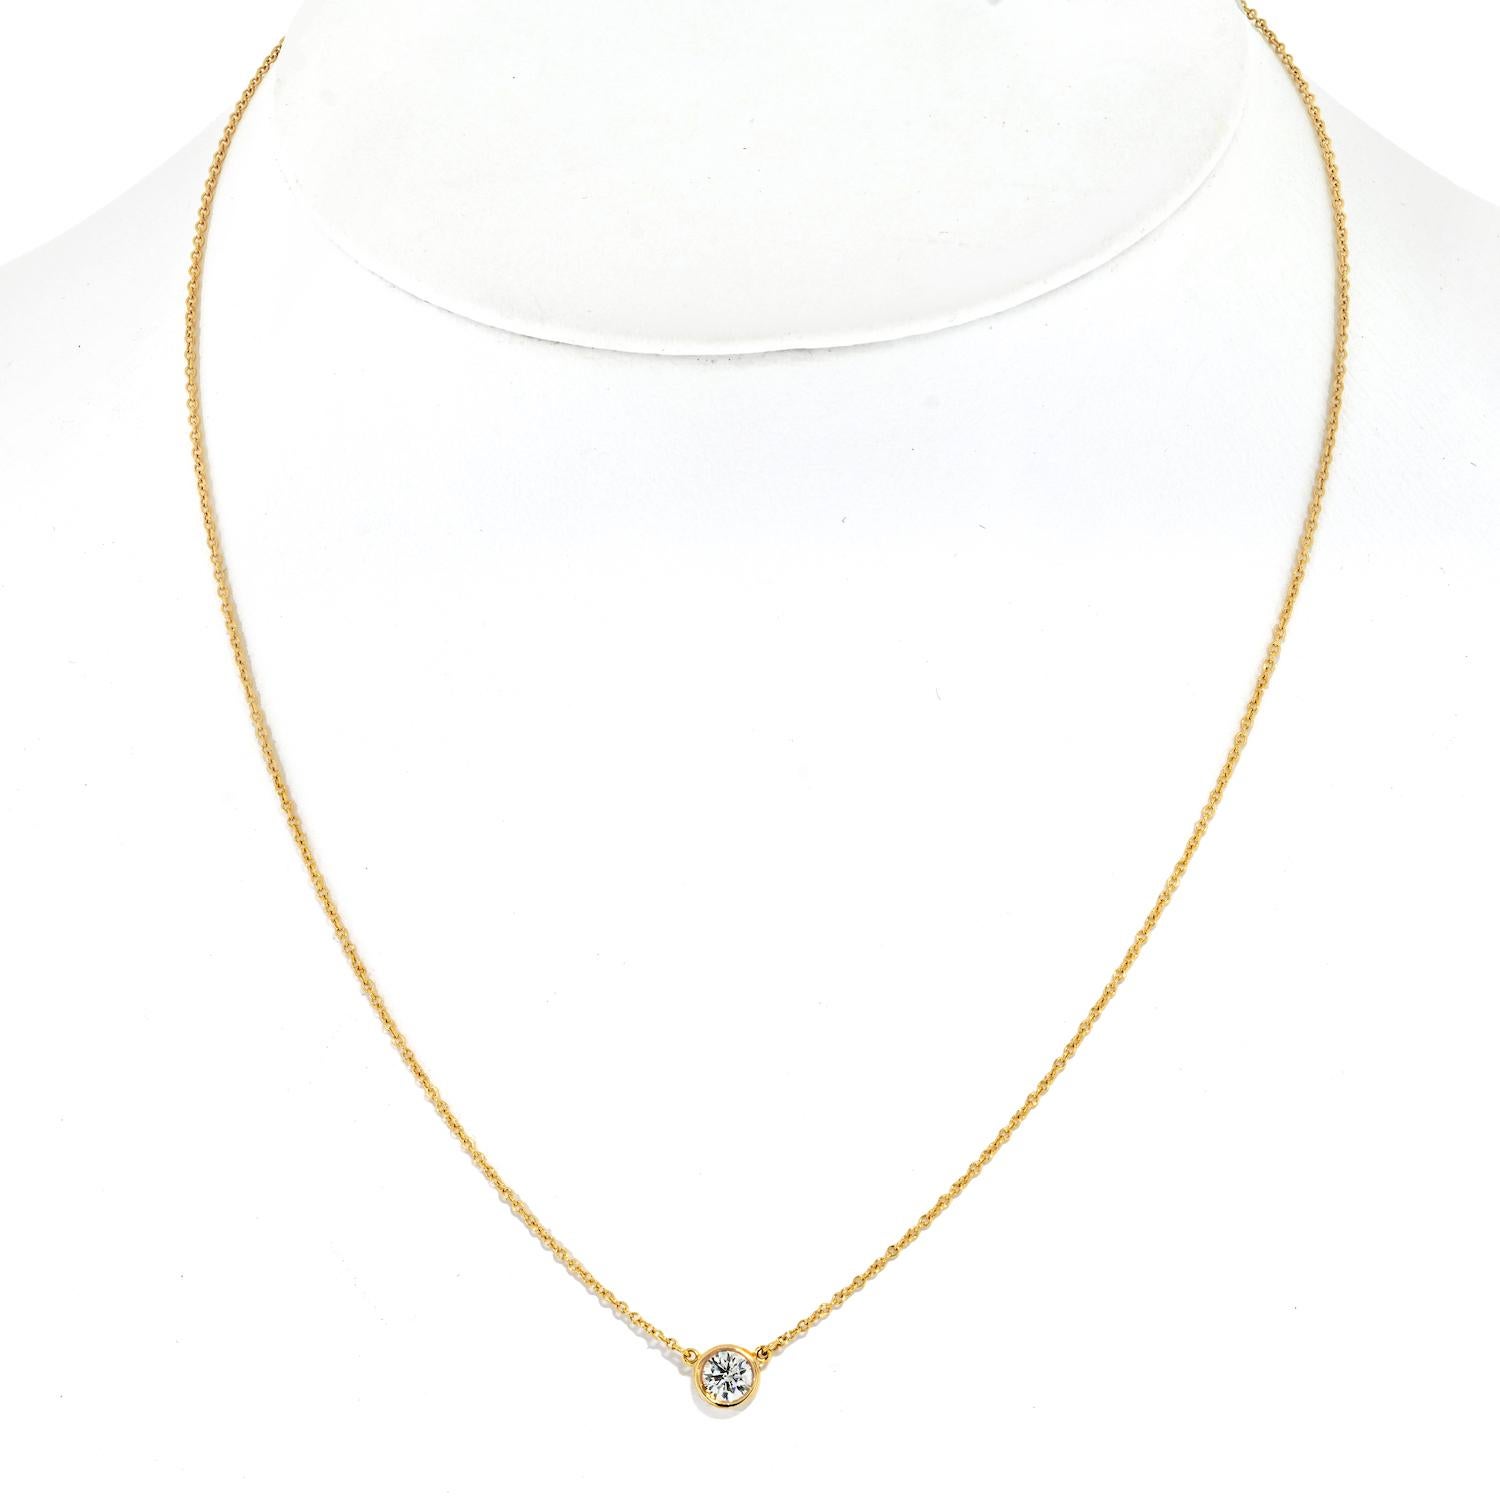 Elevate your elegance with the timeless beauty of our Estate Tiffany & Co. 18K Yellow Gold 0.45ct Round Diamond Bezel Set Pendant Necklace. This exquisite piece is a testament to Tiffany's legacy of craftsmanship and sophistication.

Crafted from